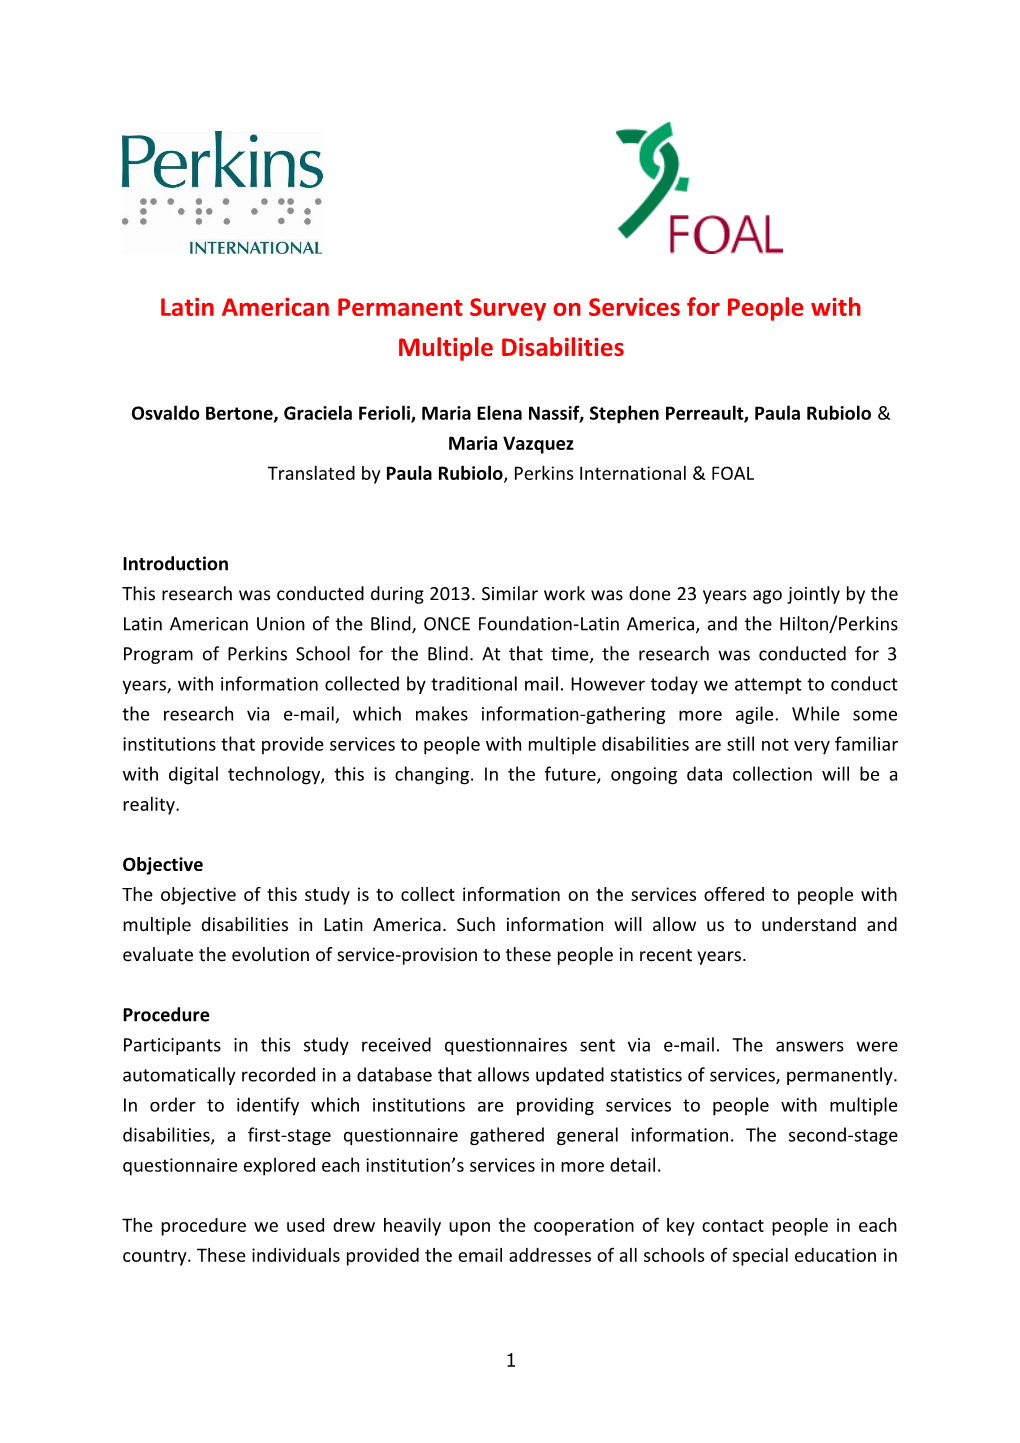 Latin American Permanent Survey on Services for People with Multiple Disabilities